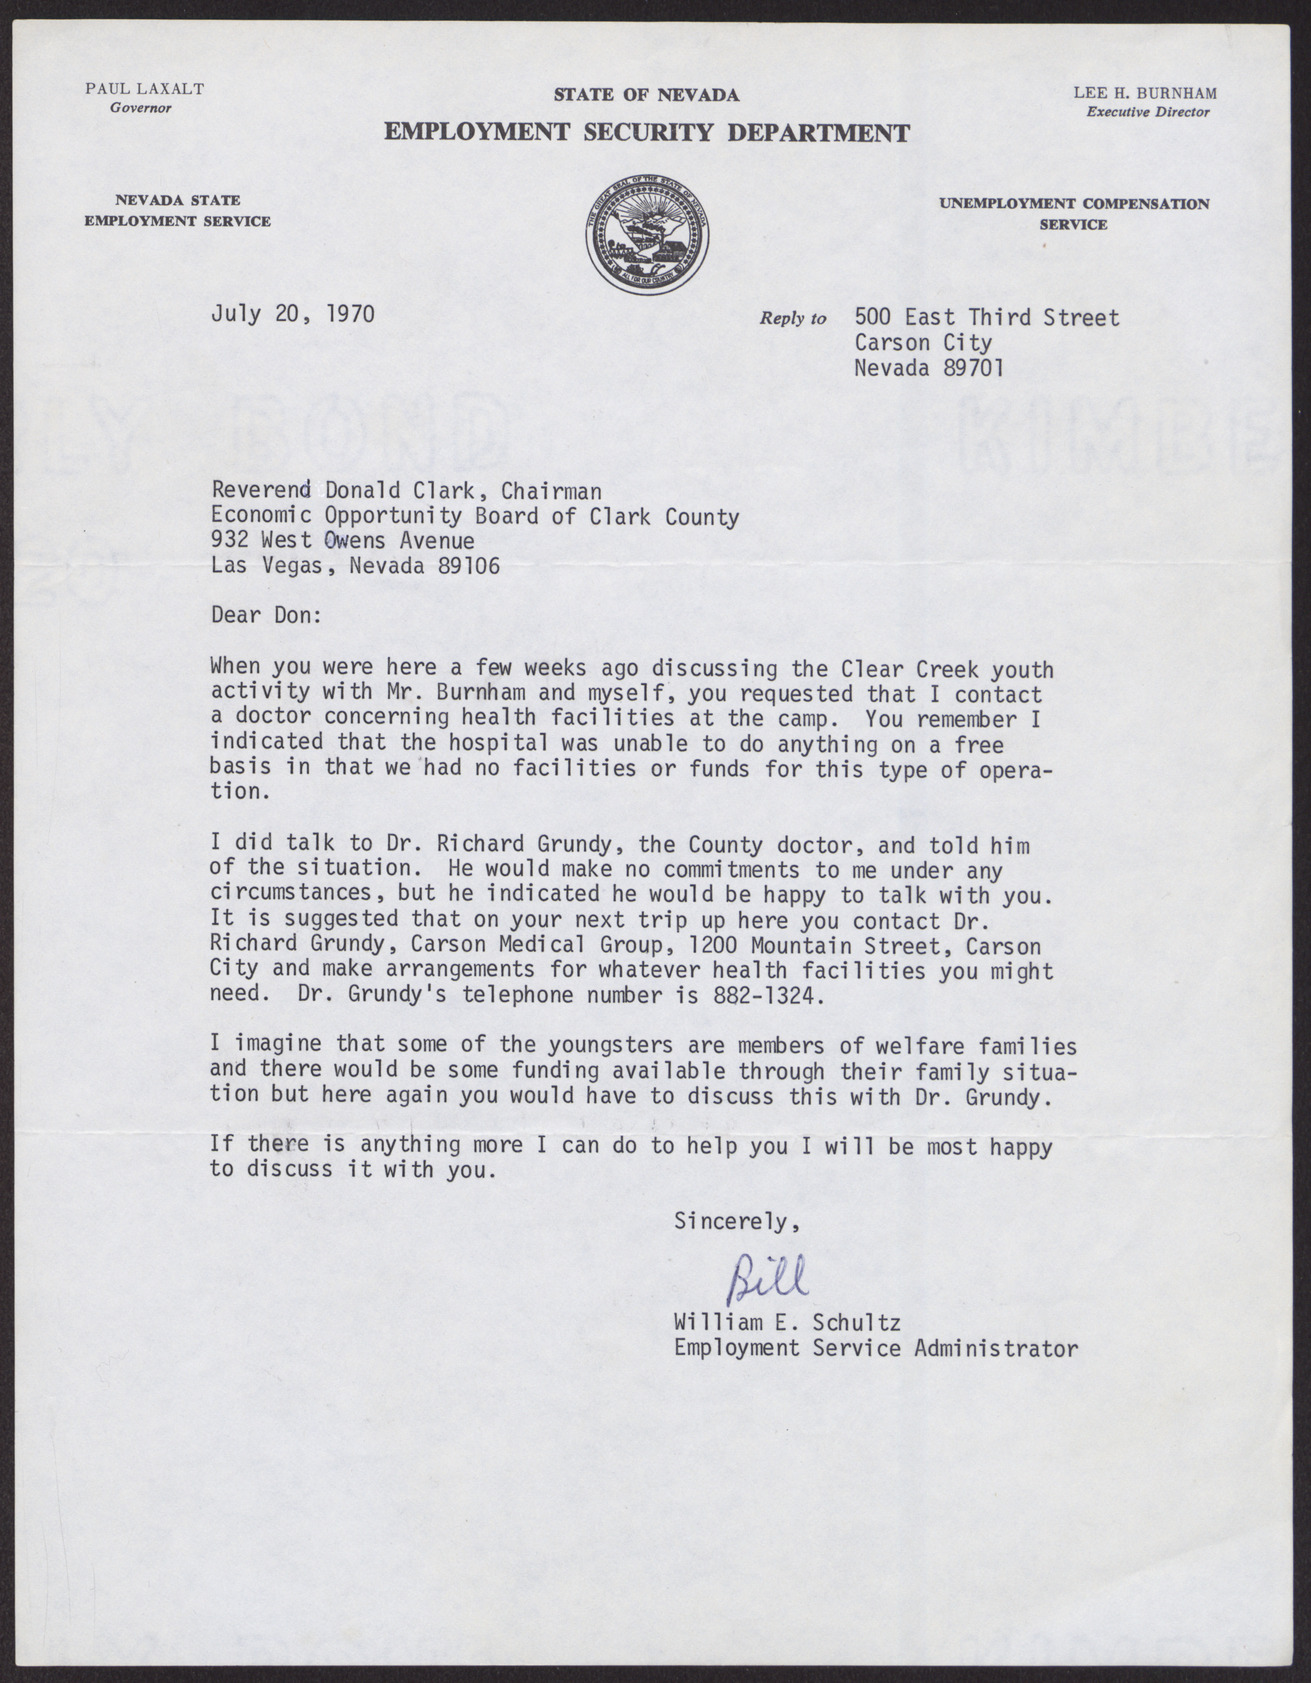 Letter to Reverend Donald Clark from William E. Schultz, July 20, 1970